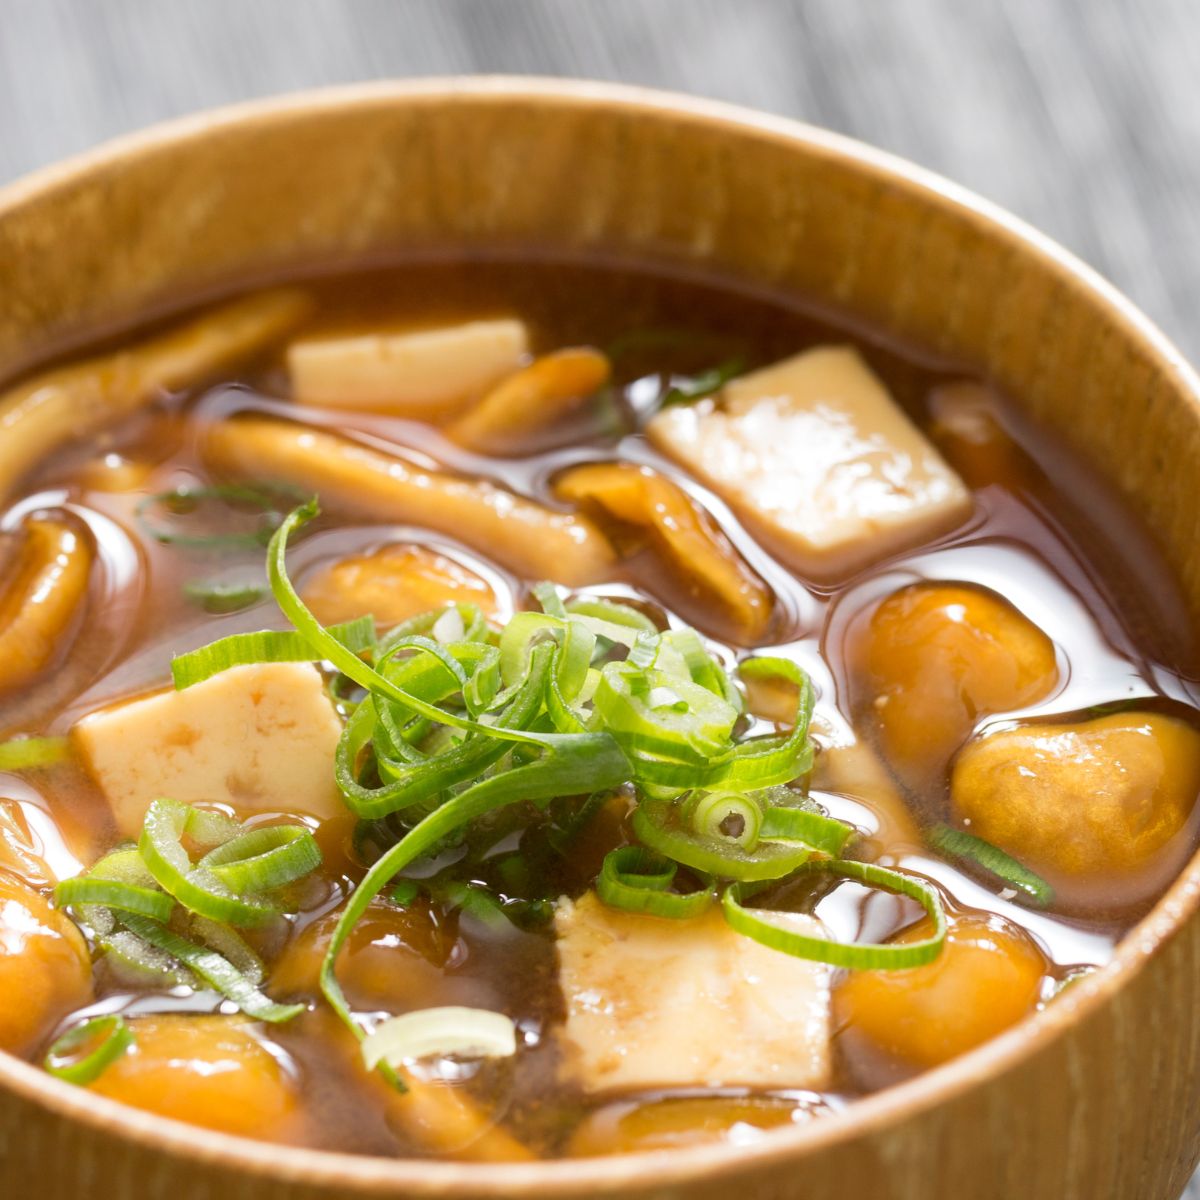 a bowl of soup with tofu pieces simmered in it